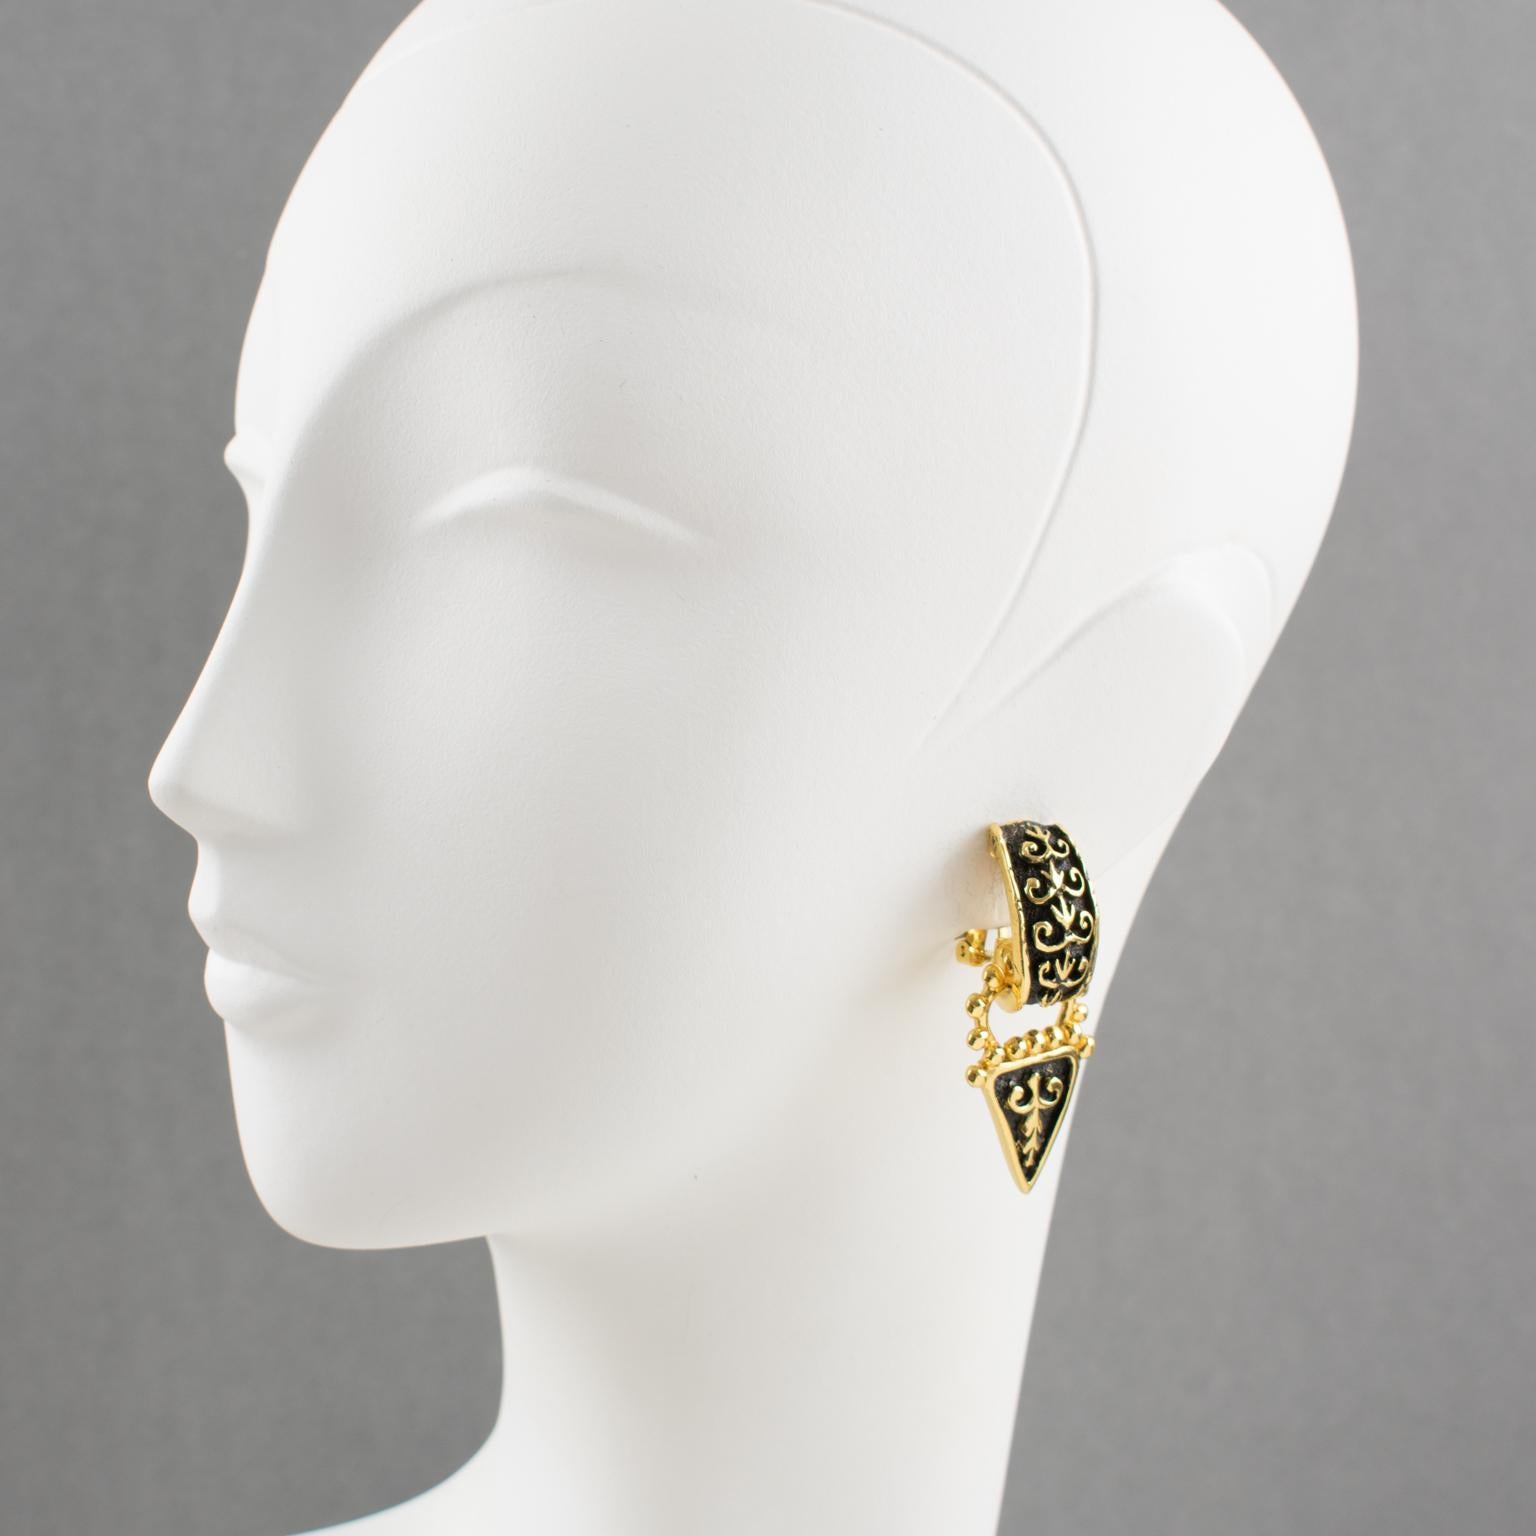 Elegant Guy Laroche Paris signed clip-on earrings. Door knocker dangling shape with Renaissance-inspired design, gilt metal all carved and textured ornate with black enamel. The earrings have an engraved signature on the back reading Guy Laroche -